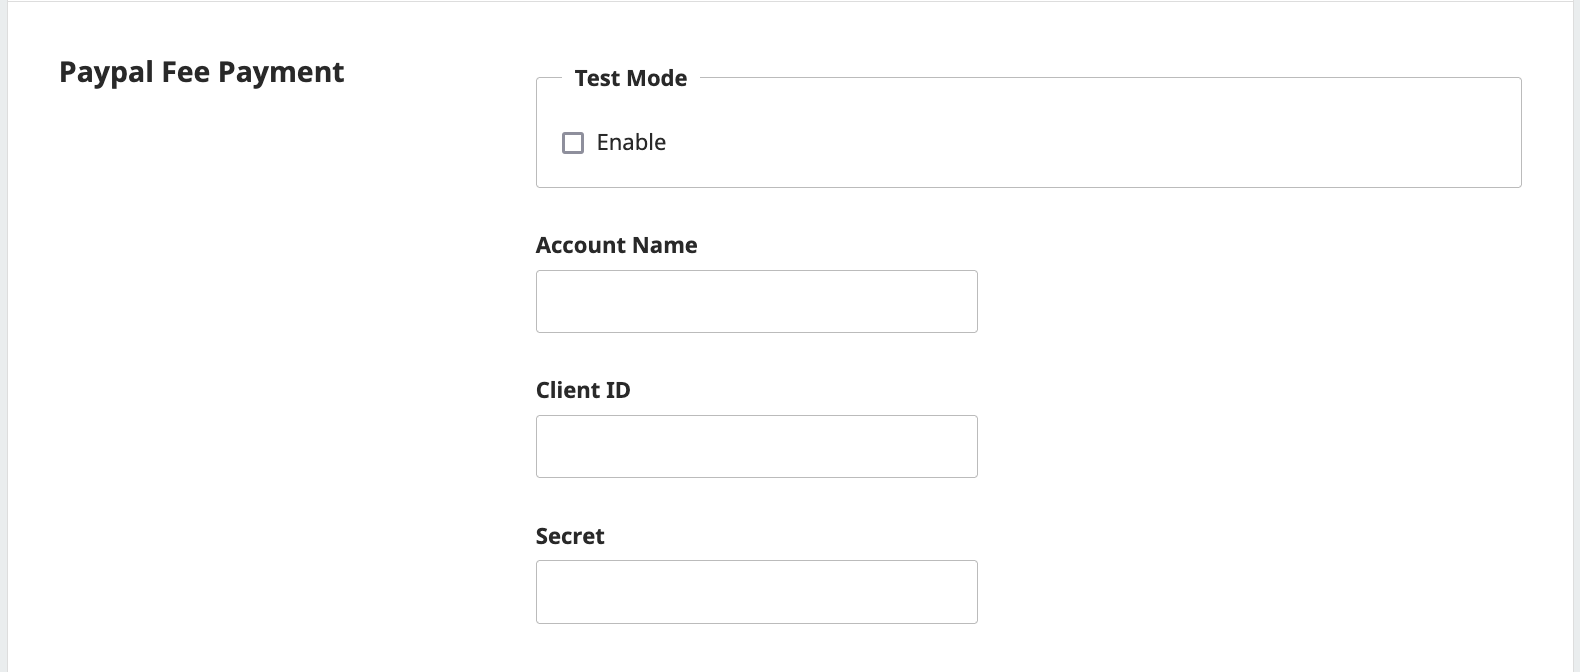 Paypal fee payment screen showing test mode enable option, account name, client ID and secret fields.